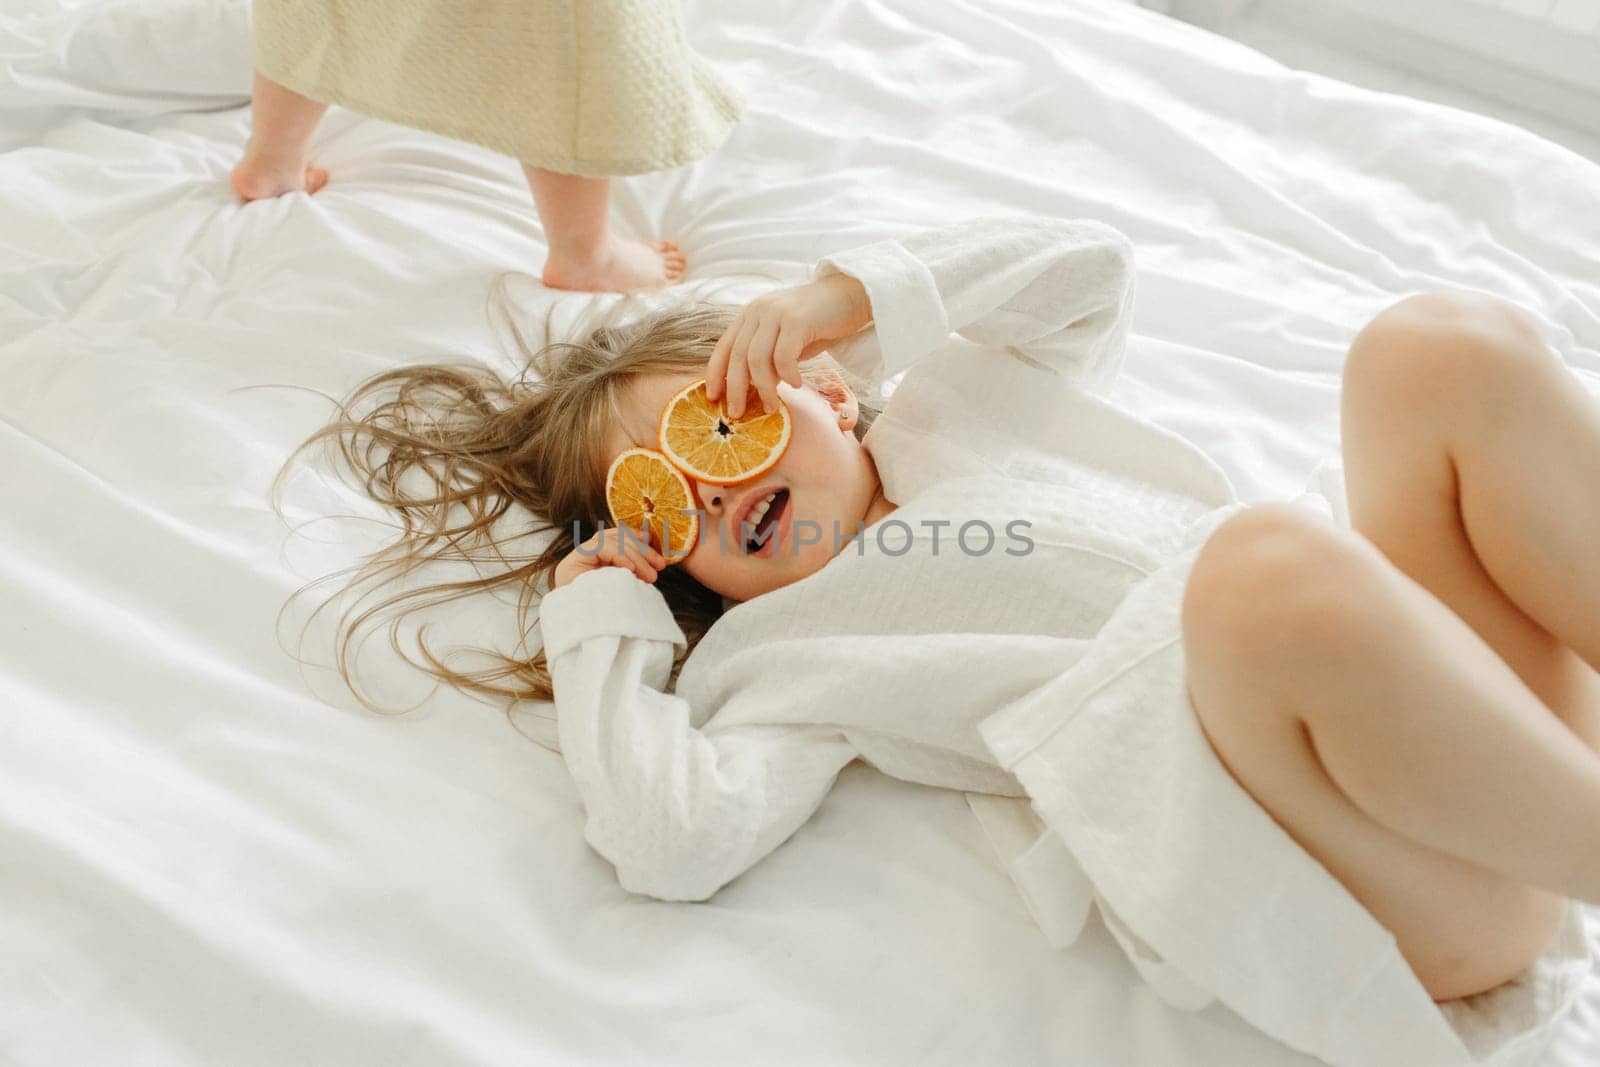 A young girl in a white coat, lying in bed, playing with candied oranges. by Sd28DimoN_1976